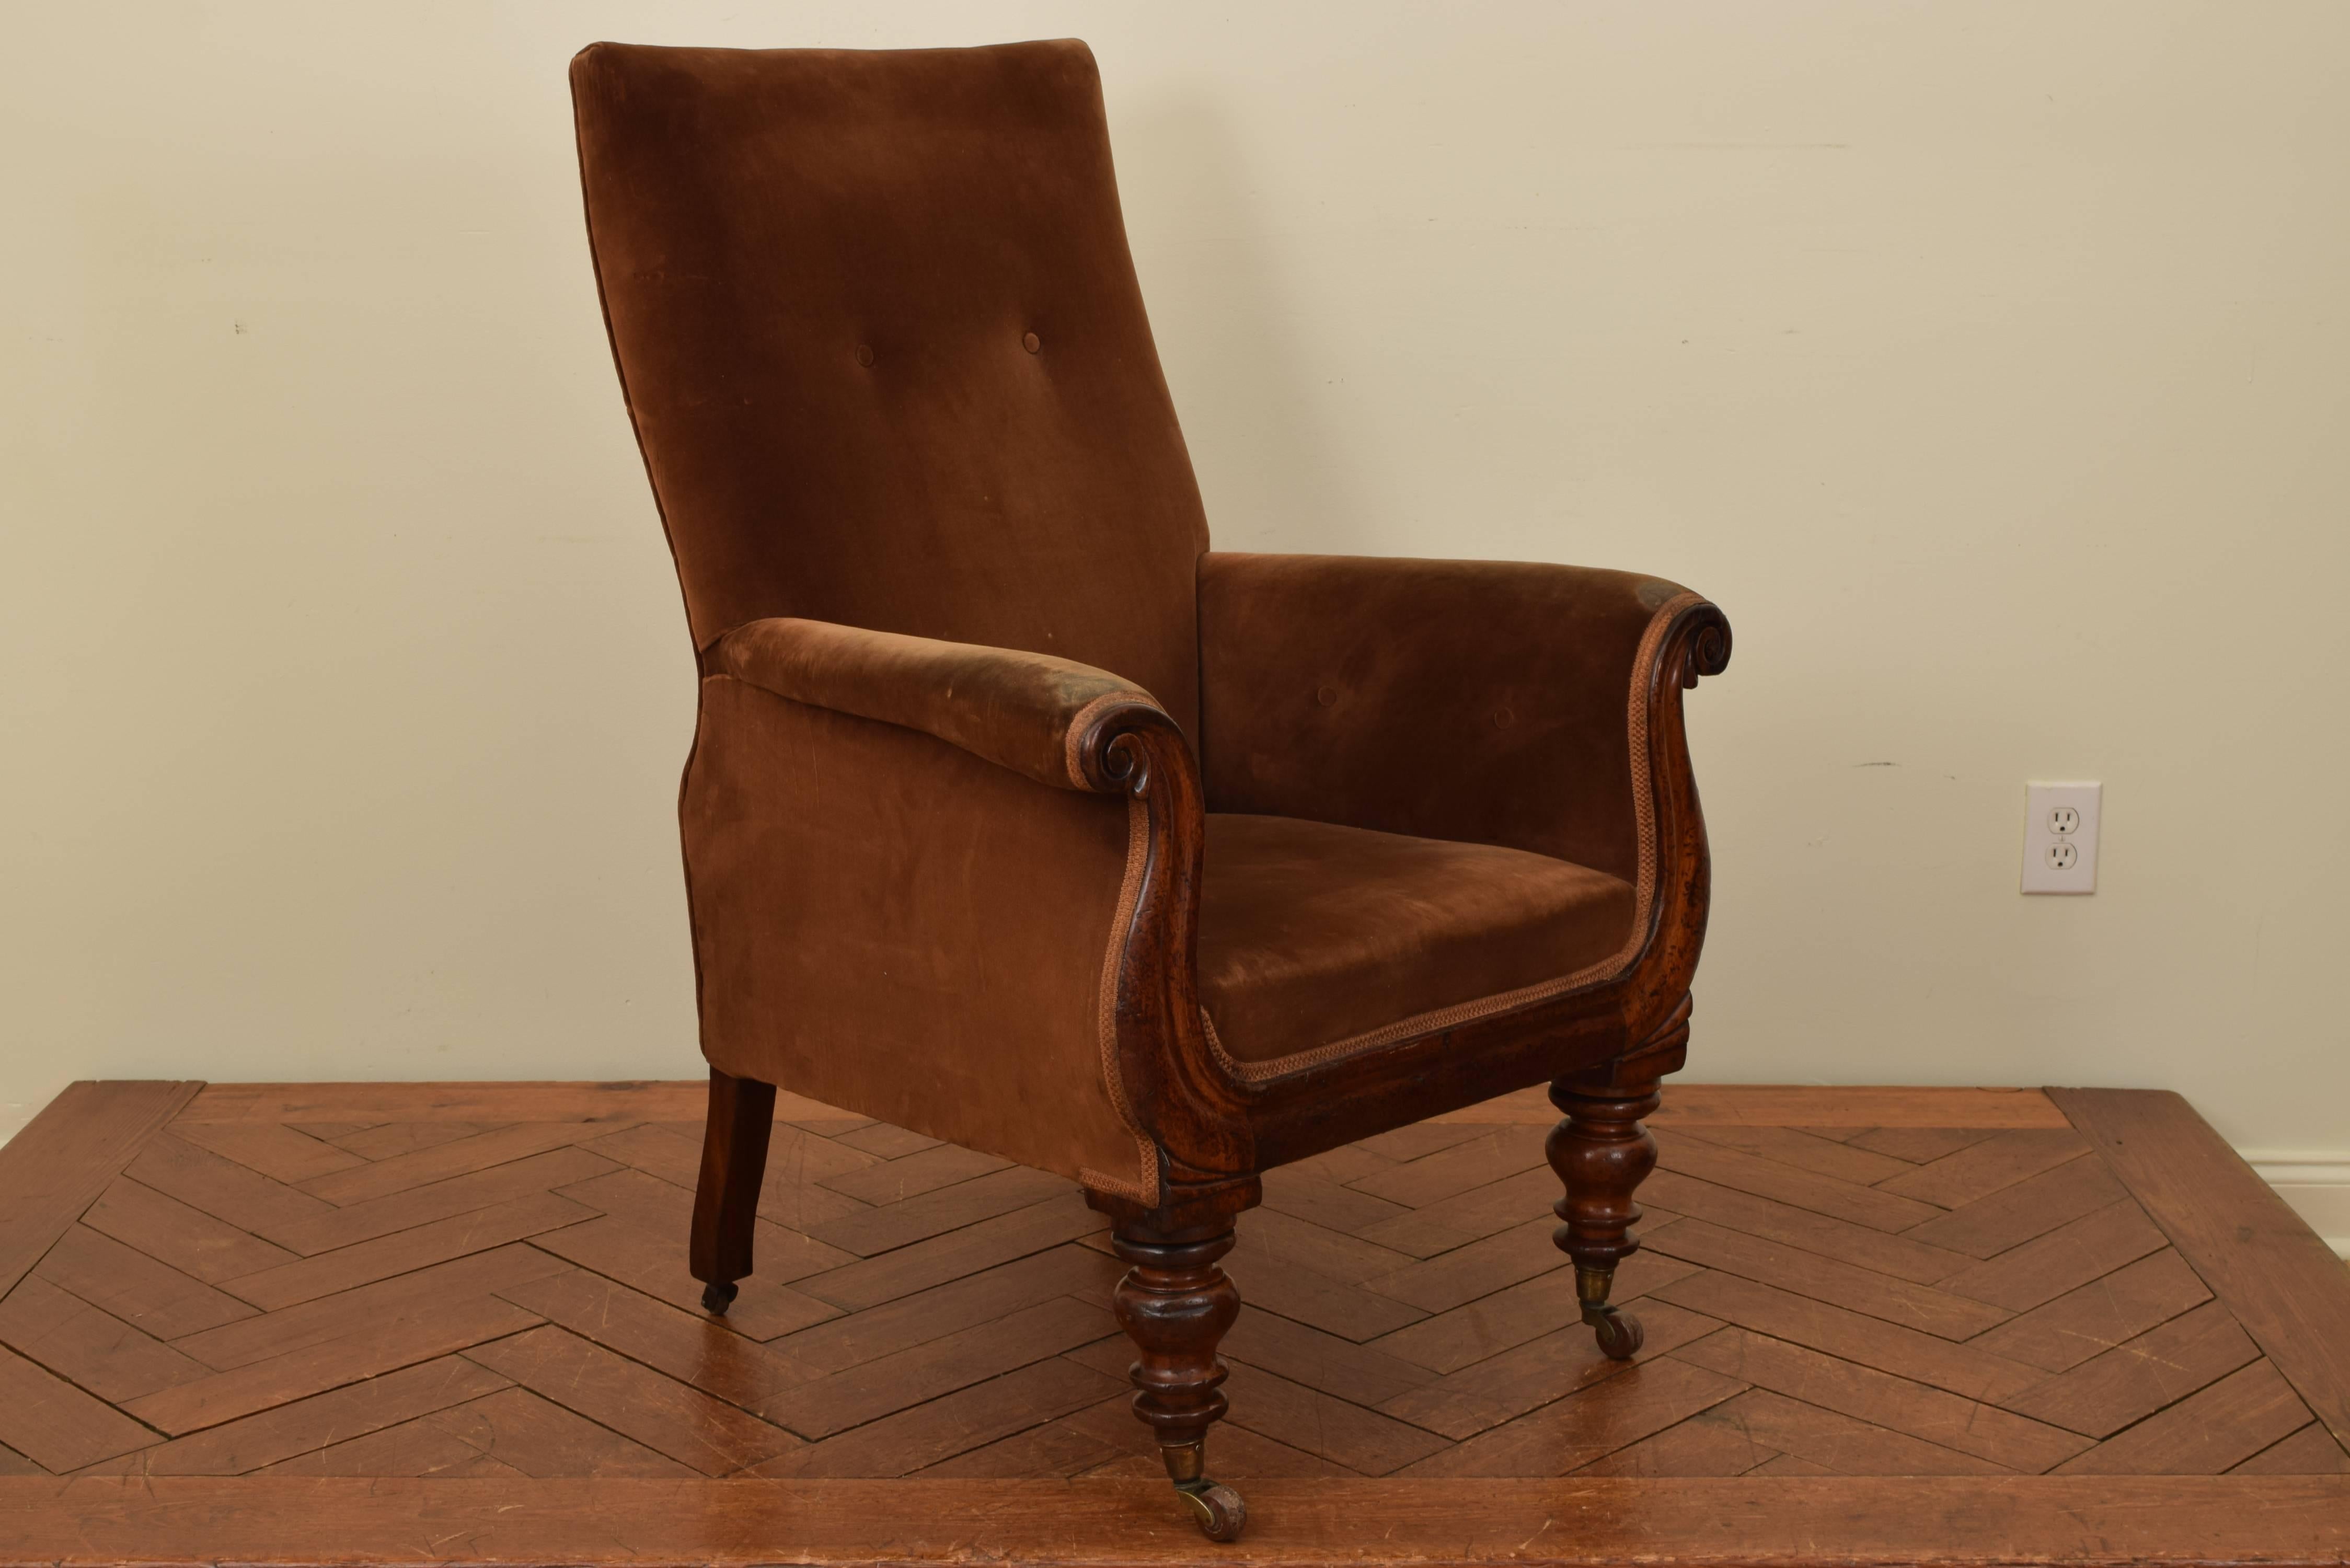 William IV walnut upholstered armchair having a slightly leaning back with button tufting, the rolled arms are closed and also have button tufting, the front of the chair is shaped and carved in a lyre shape, raised on turned front legs and splayed